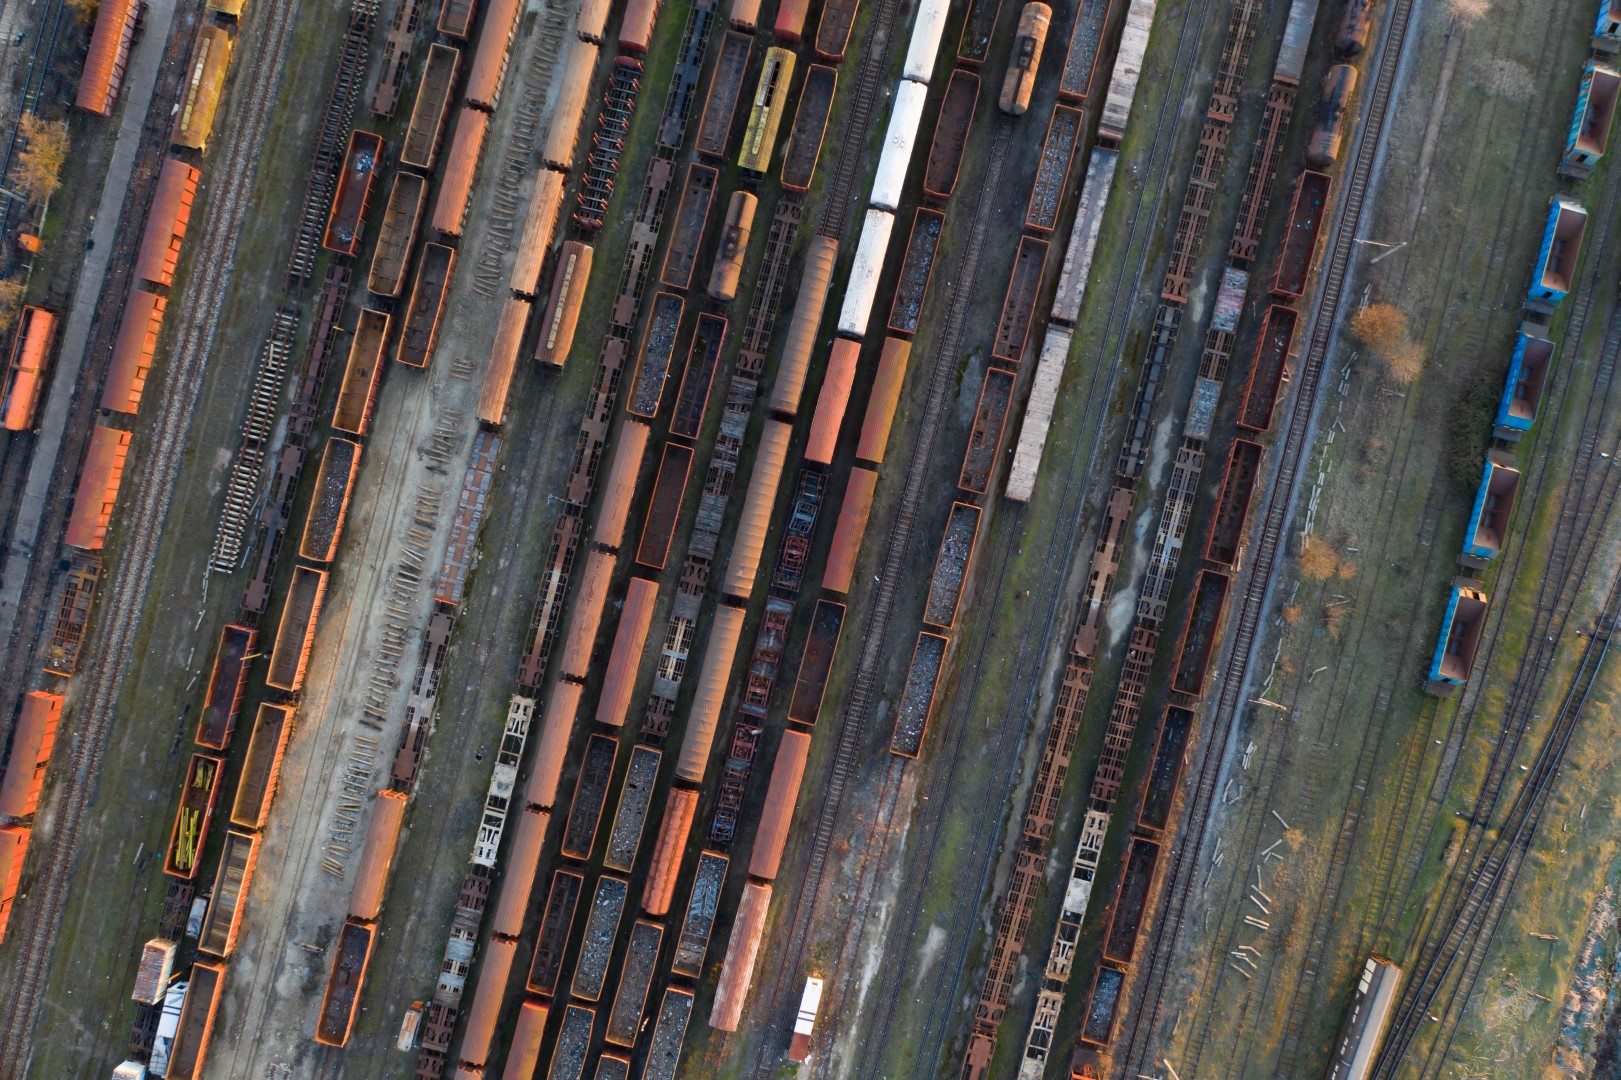 Aerial view of various railway carriage trains with goods on the railway station, top view.